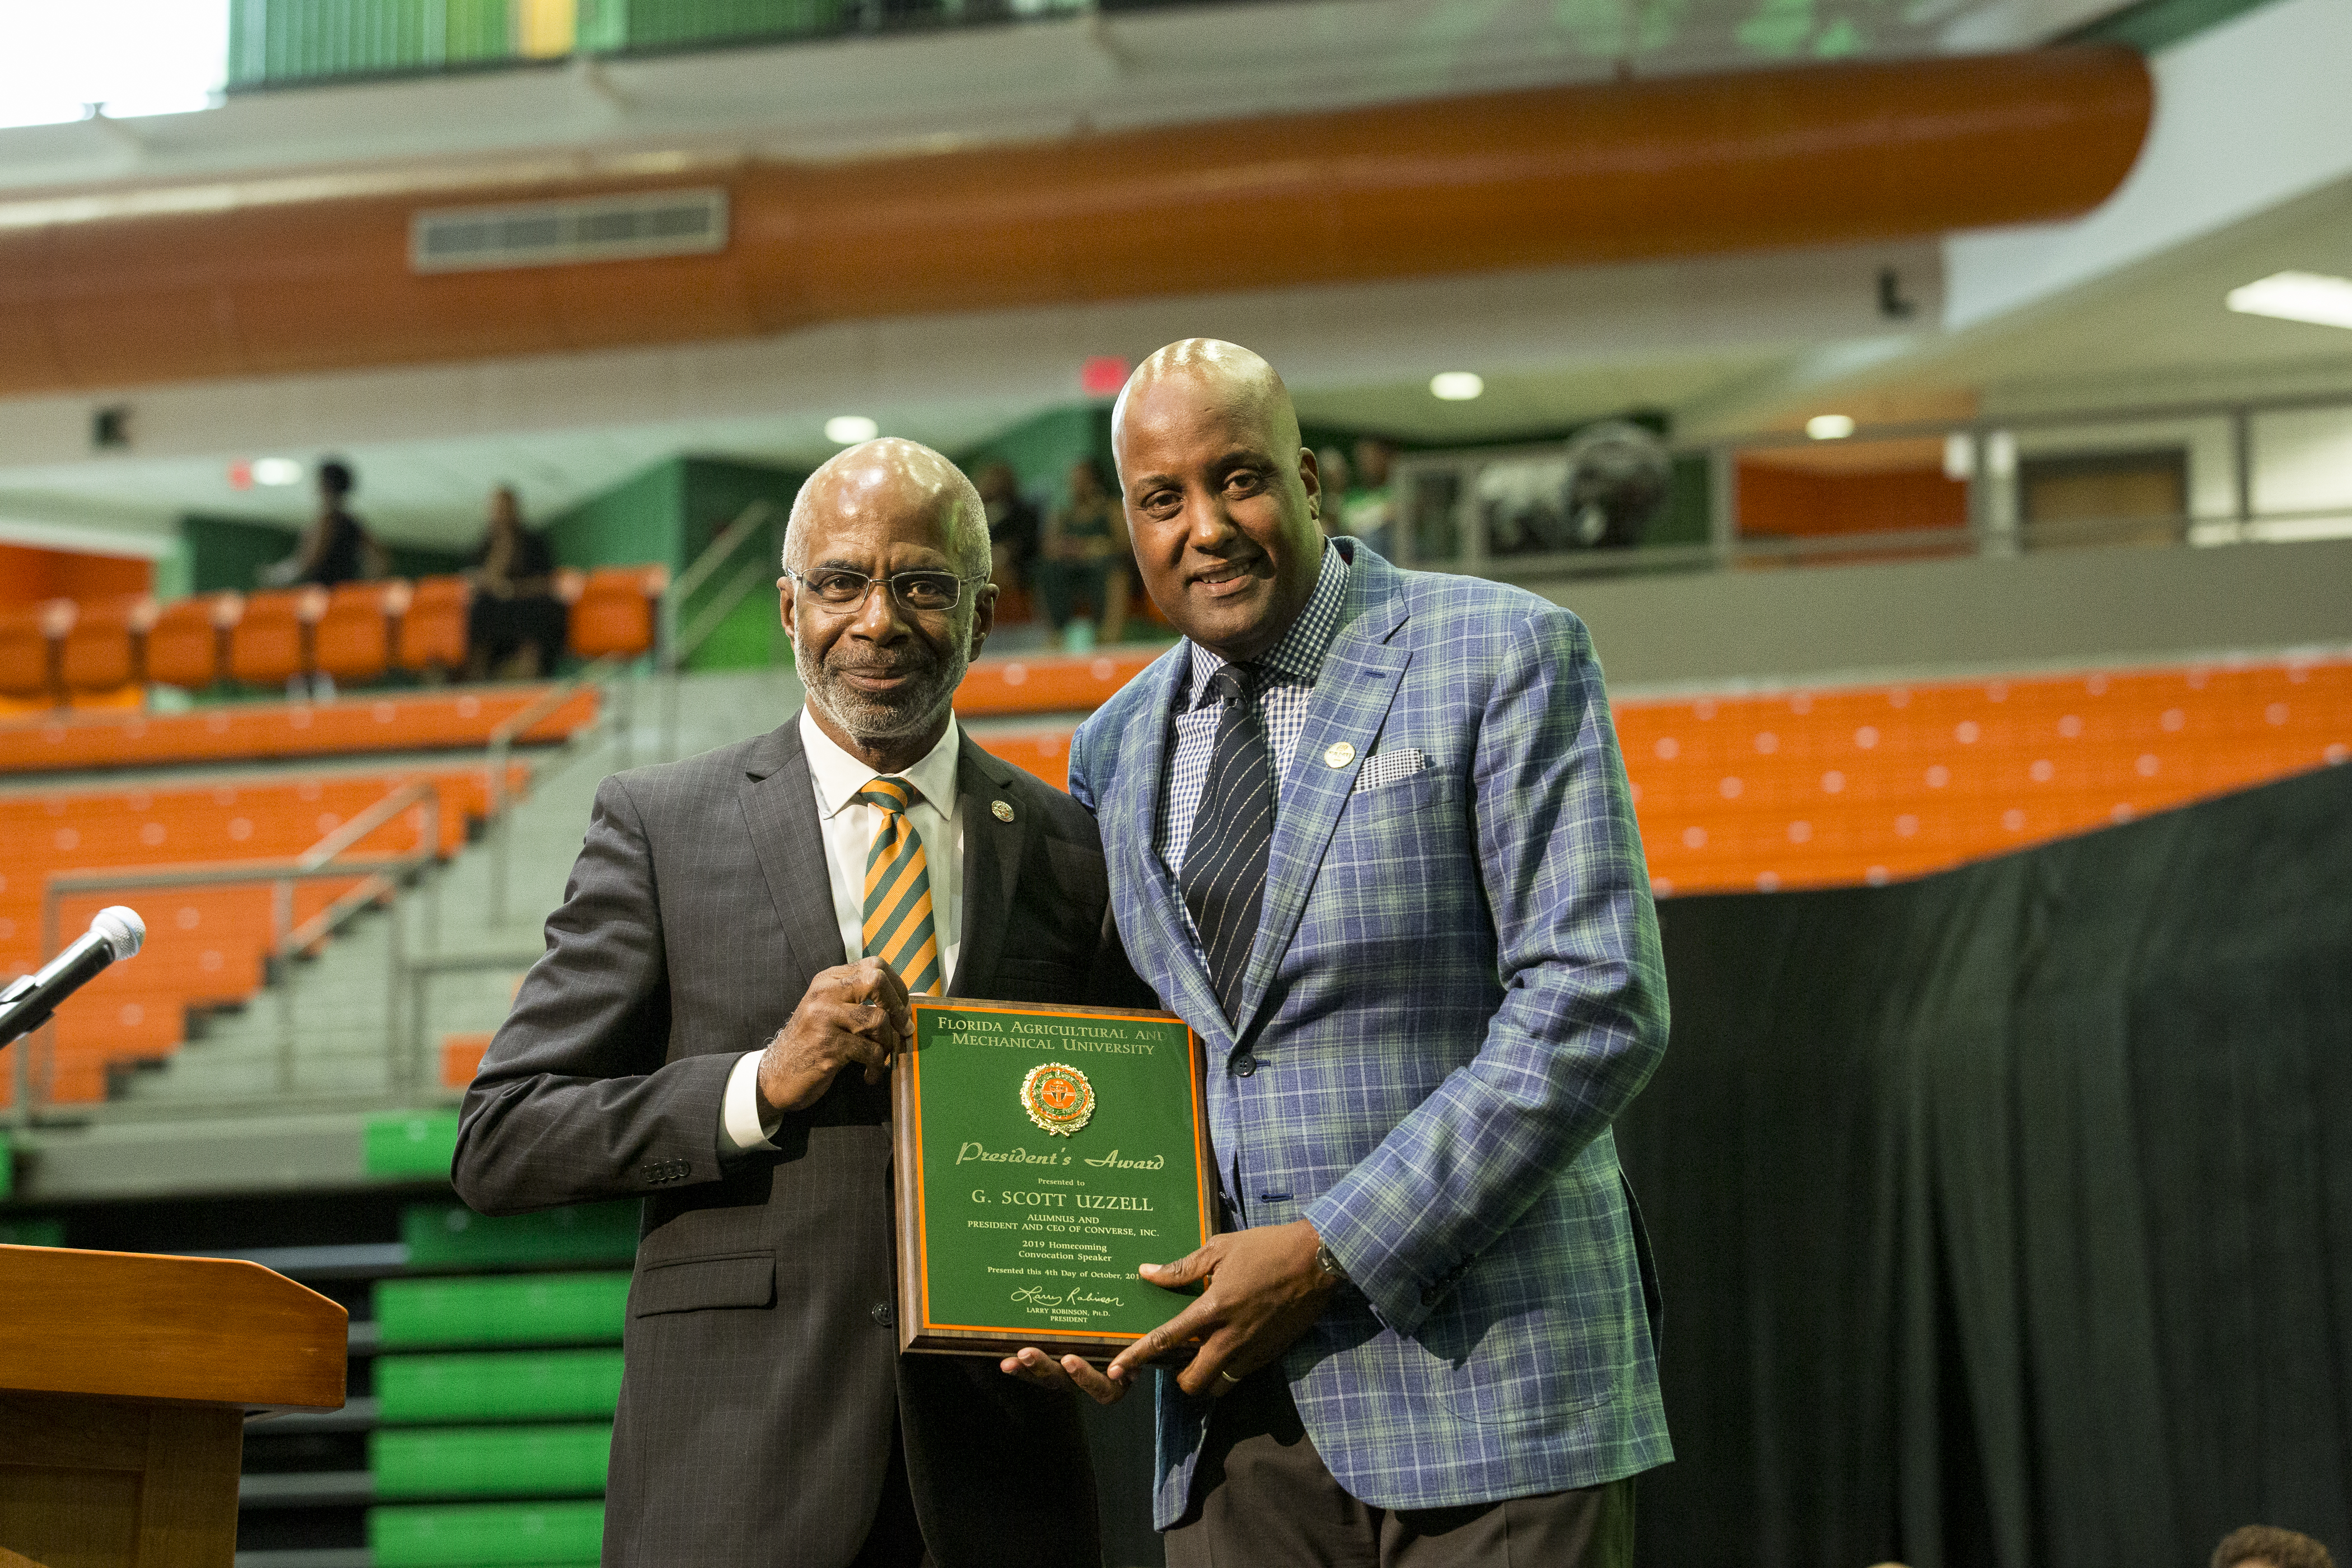 Converse President and FAMU Alumnus Uzzell Wows Convocation With 'FAMU Made  Me' Top 10 List - FAMU Forward